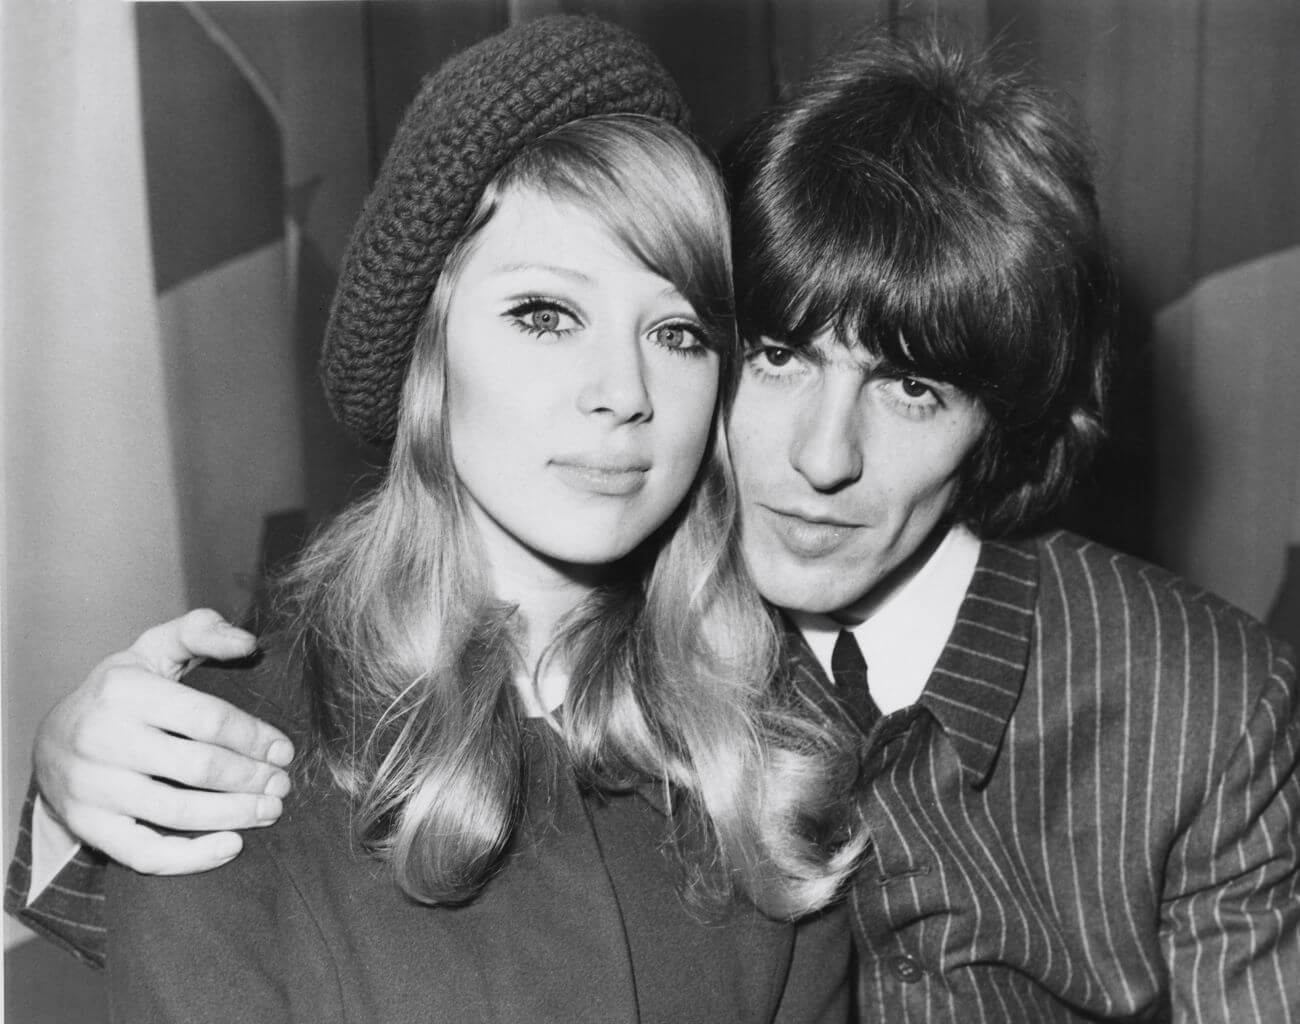 A black and white picture of George Harrison with his arm around Pattie Boyd's shoulders. She wears a knit hat.